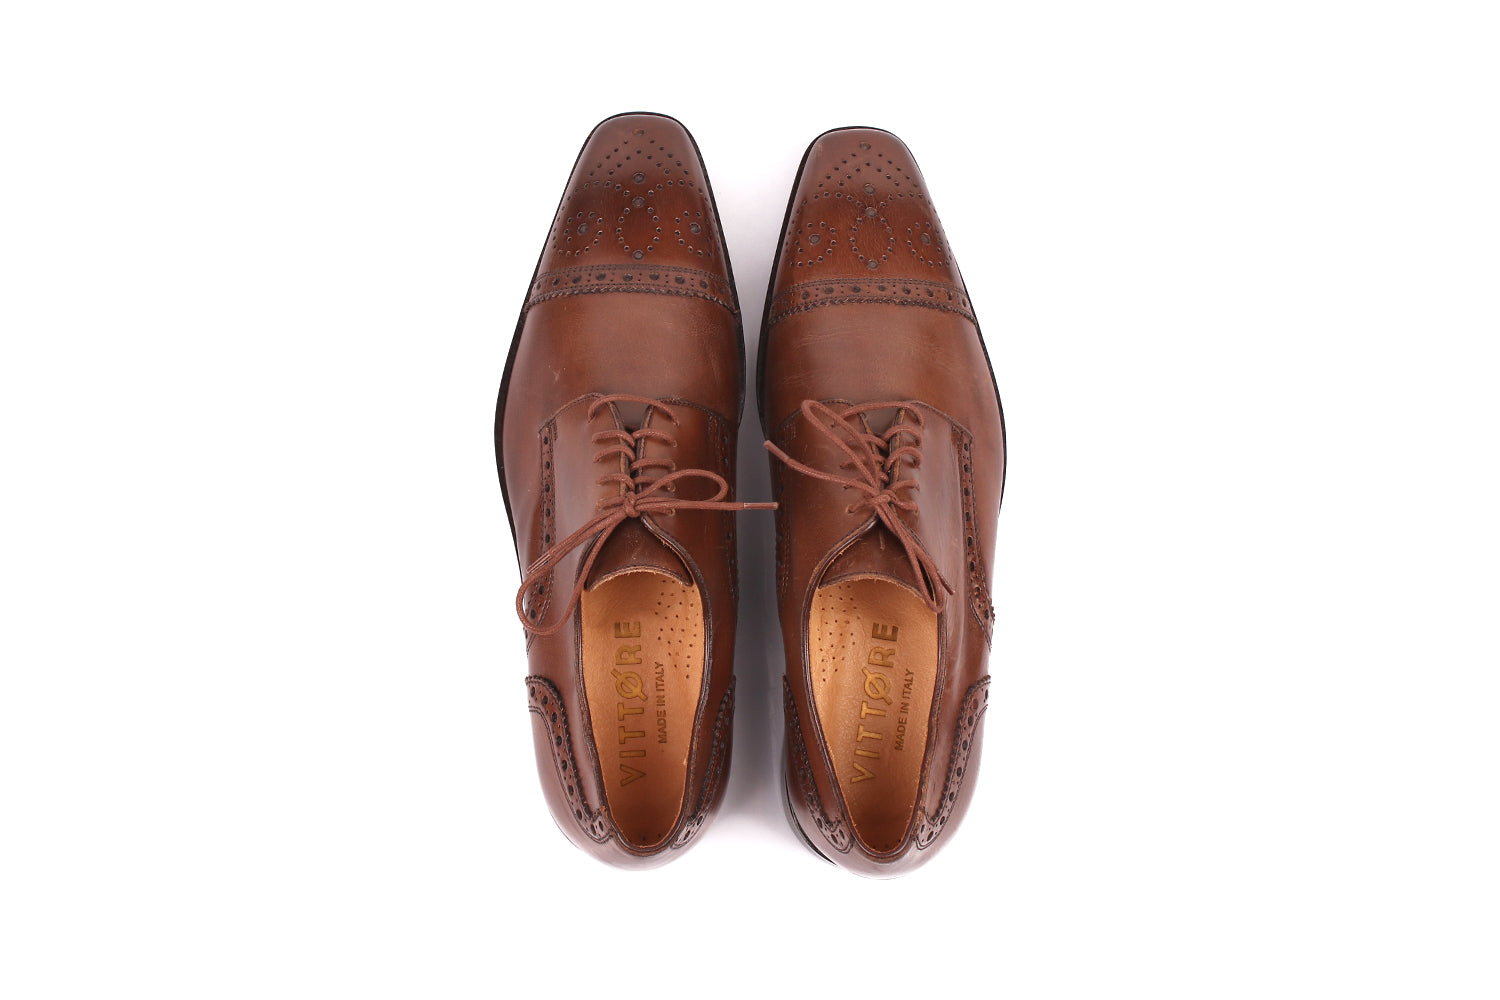 Brown Derby Shoes for Men